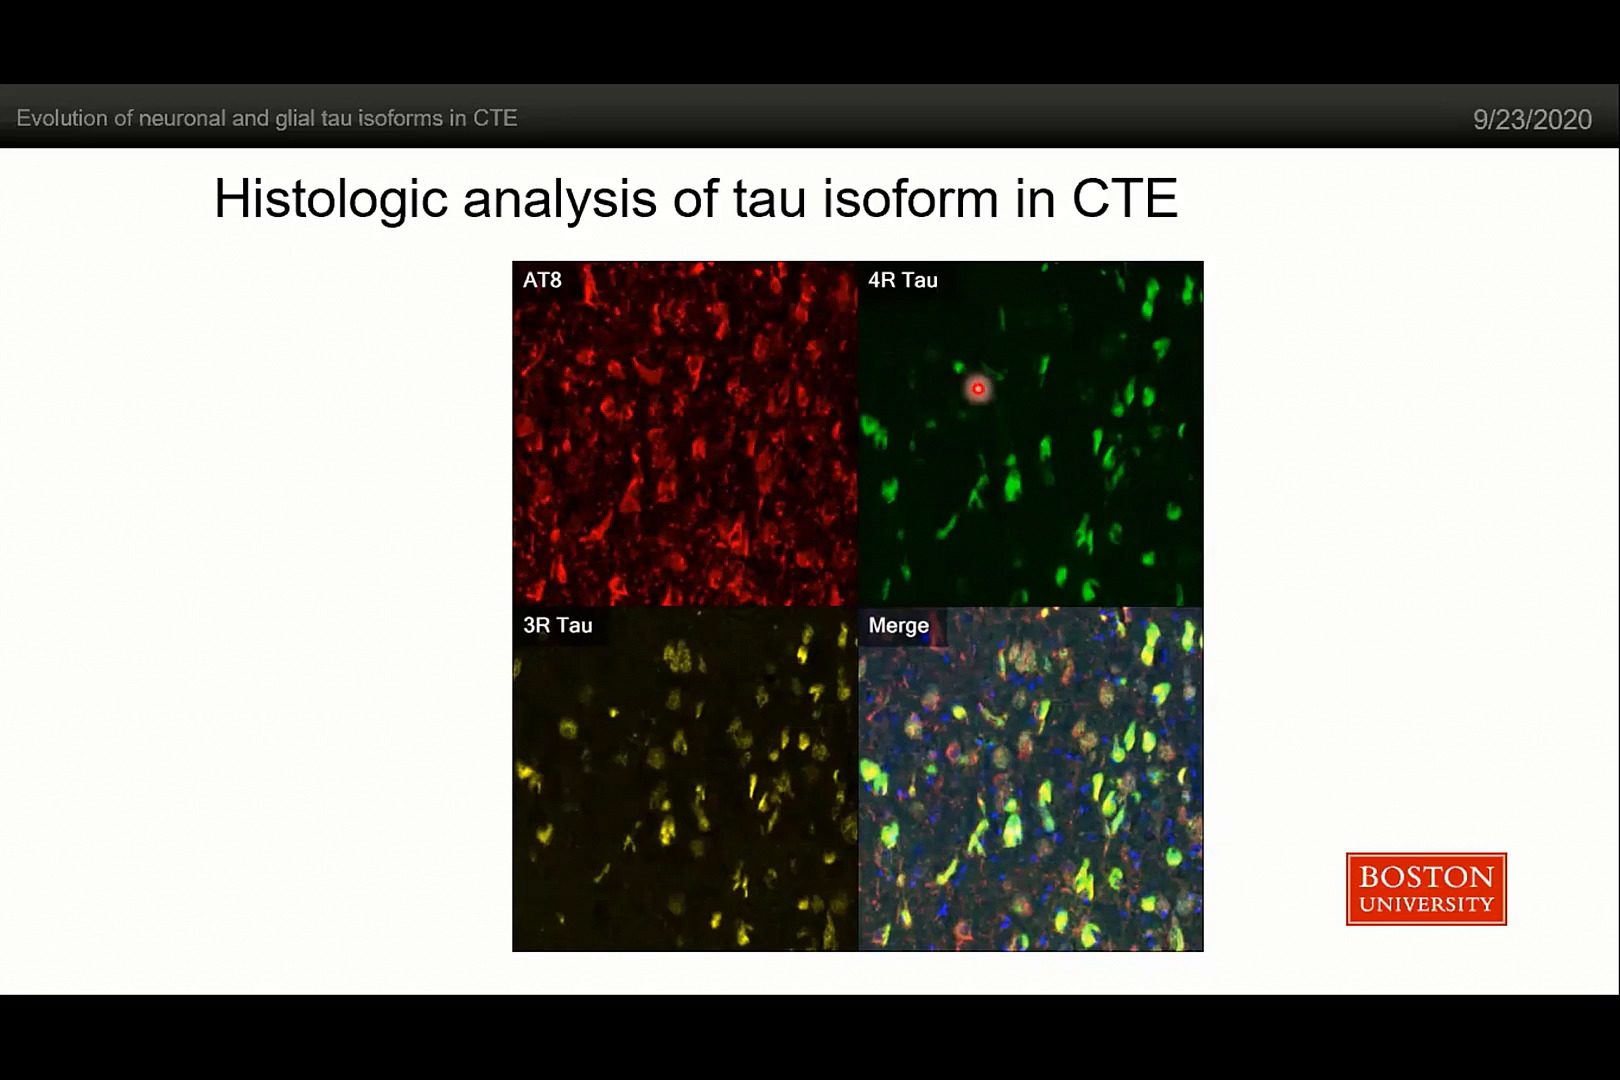 video-evolution-of-neuronal-and-glial-tau-isoforms-in-chronic-traumatic-encephalopathy-cte